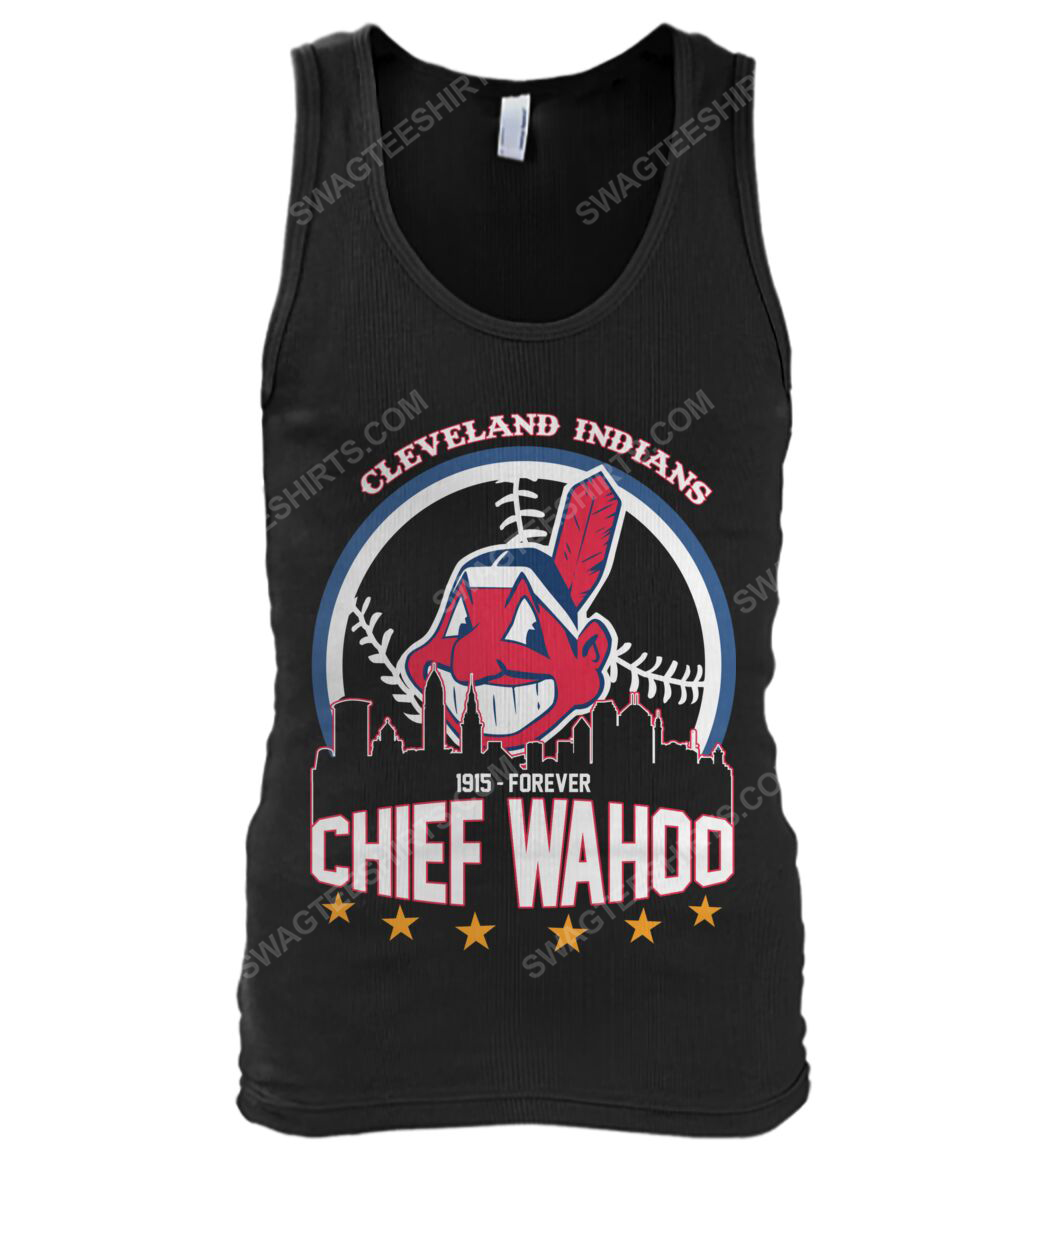 The cleveland indians 1915 forever chief wahoo tank top 1